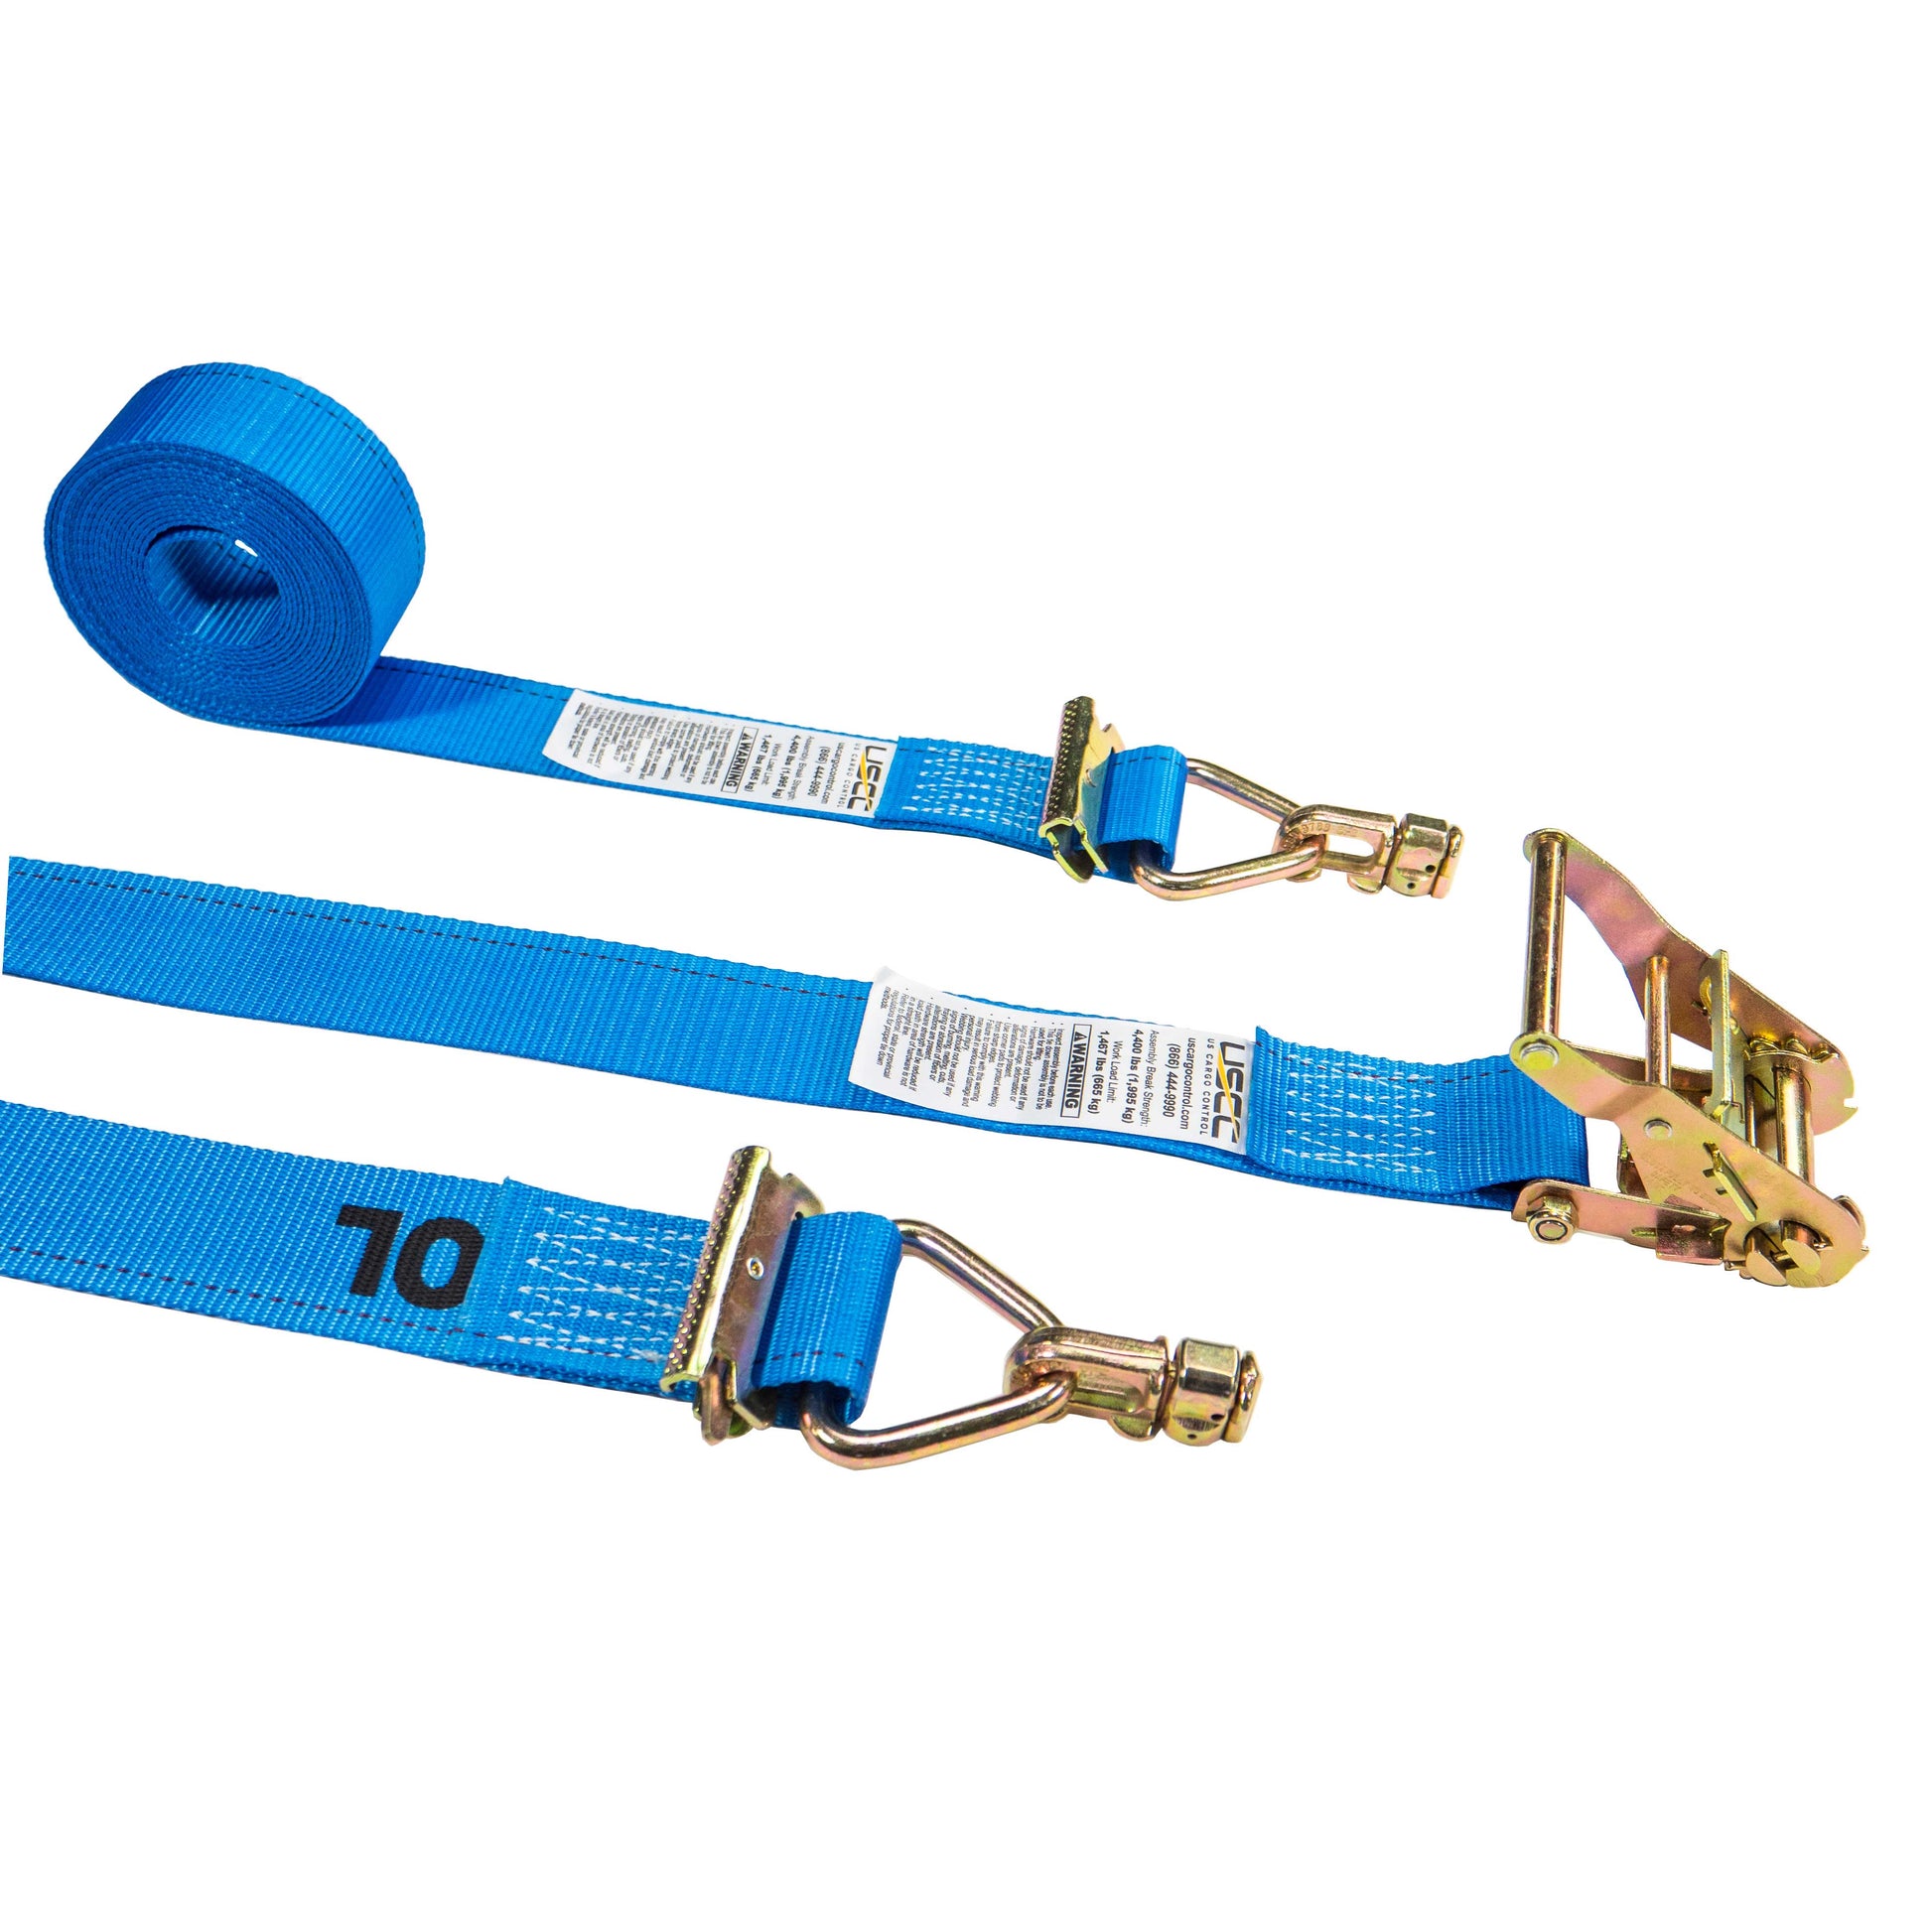 2 inch x 20 foot Blue E Track Ratchet Straps w Double Stud Fittings image 1 of 9